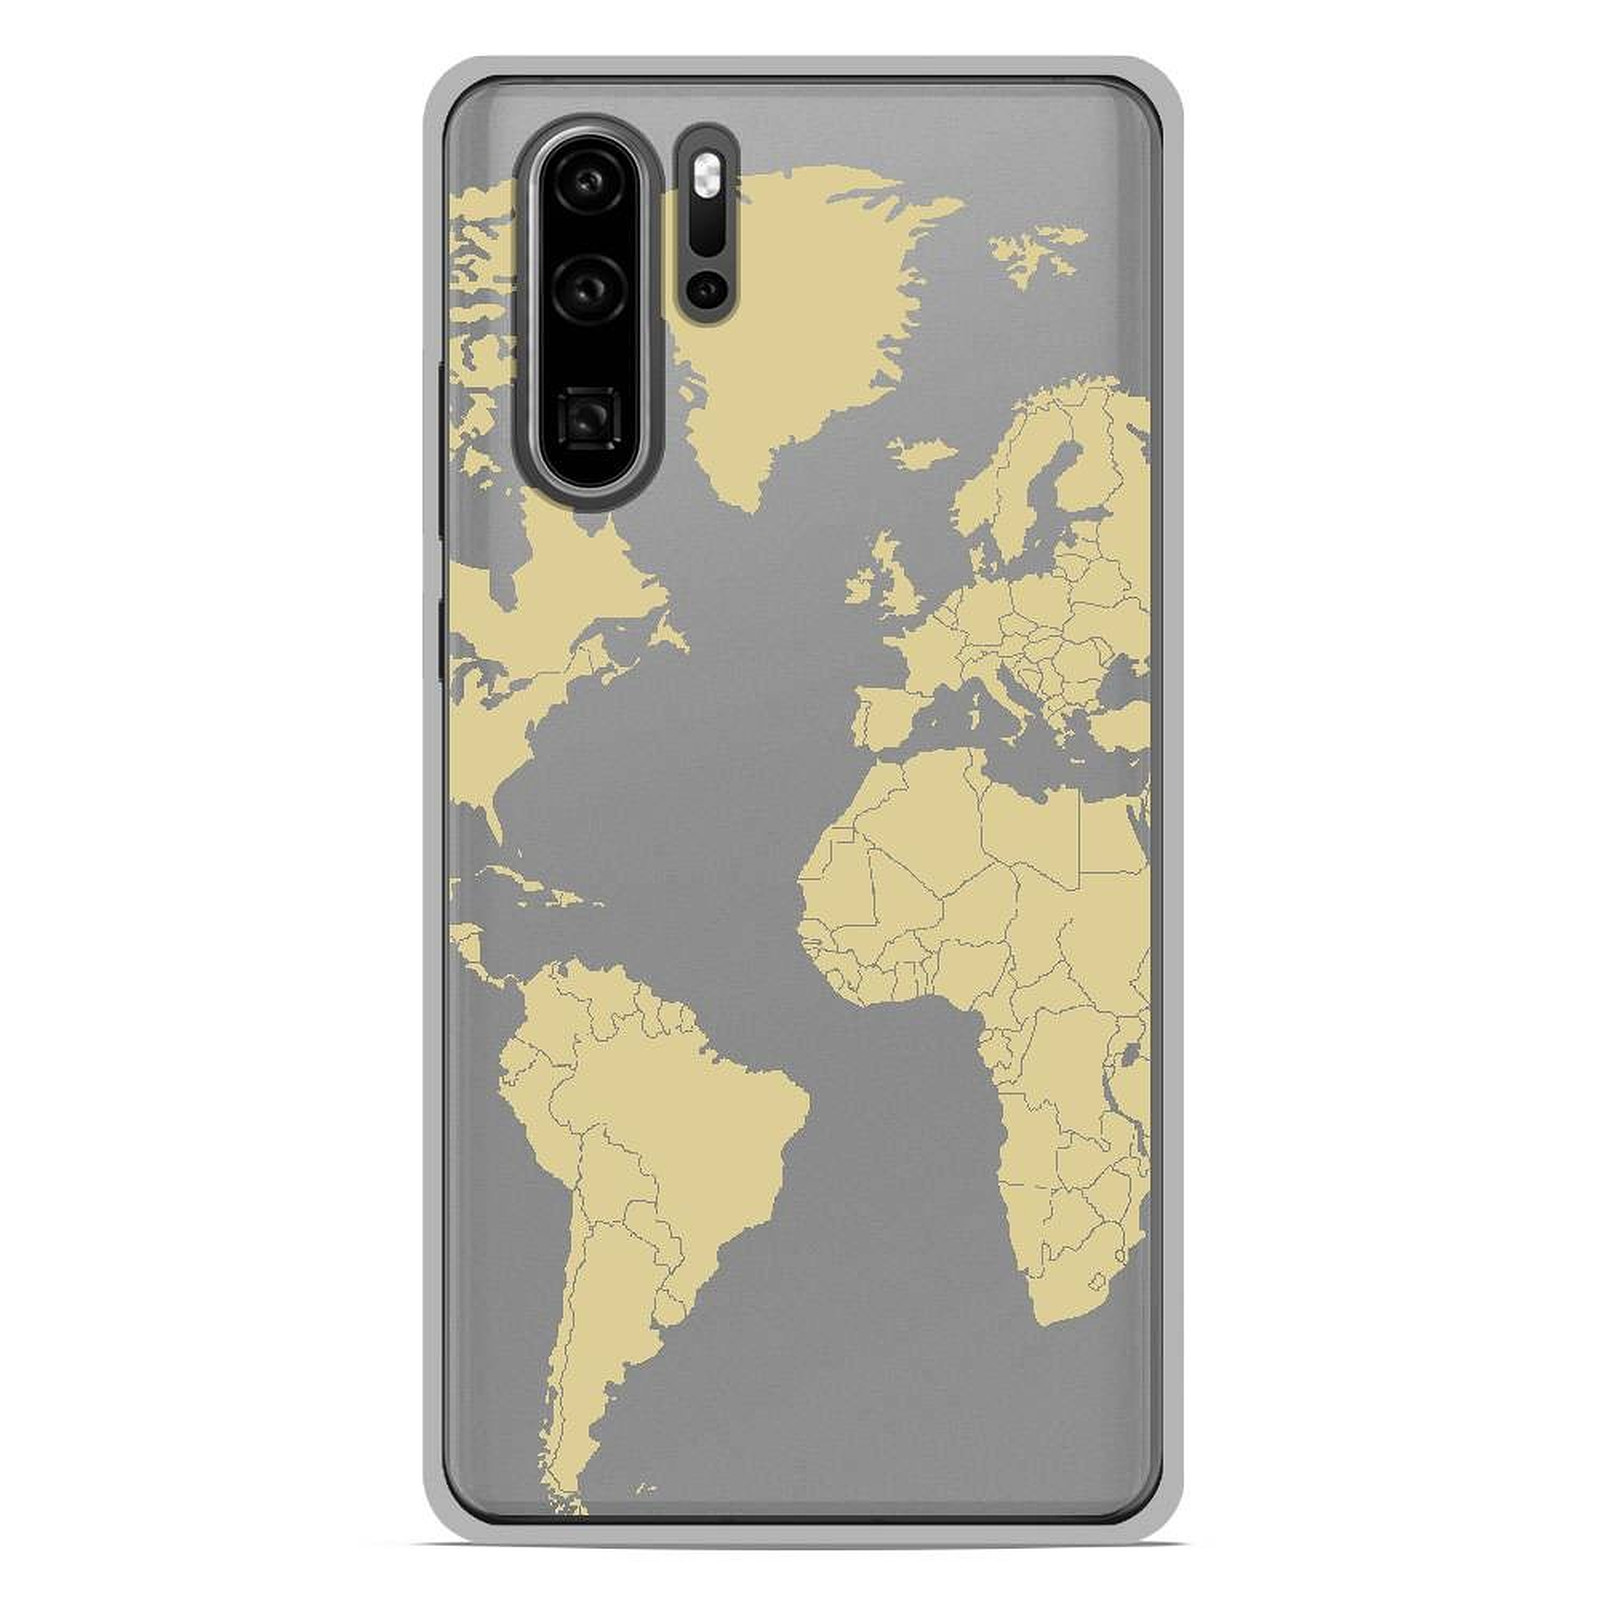 1001 Coques Coque silicone gel Huawei P30 Pro motif Map beige - Coque telephone 1001Coques